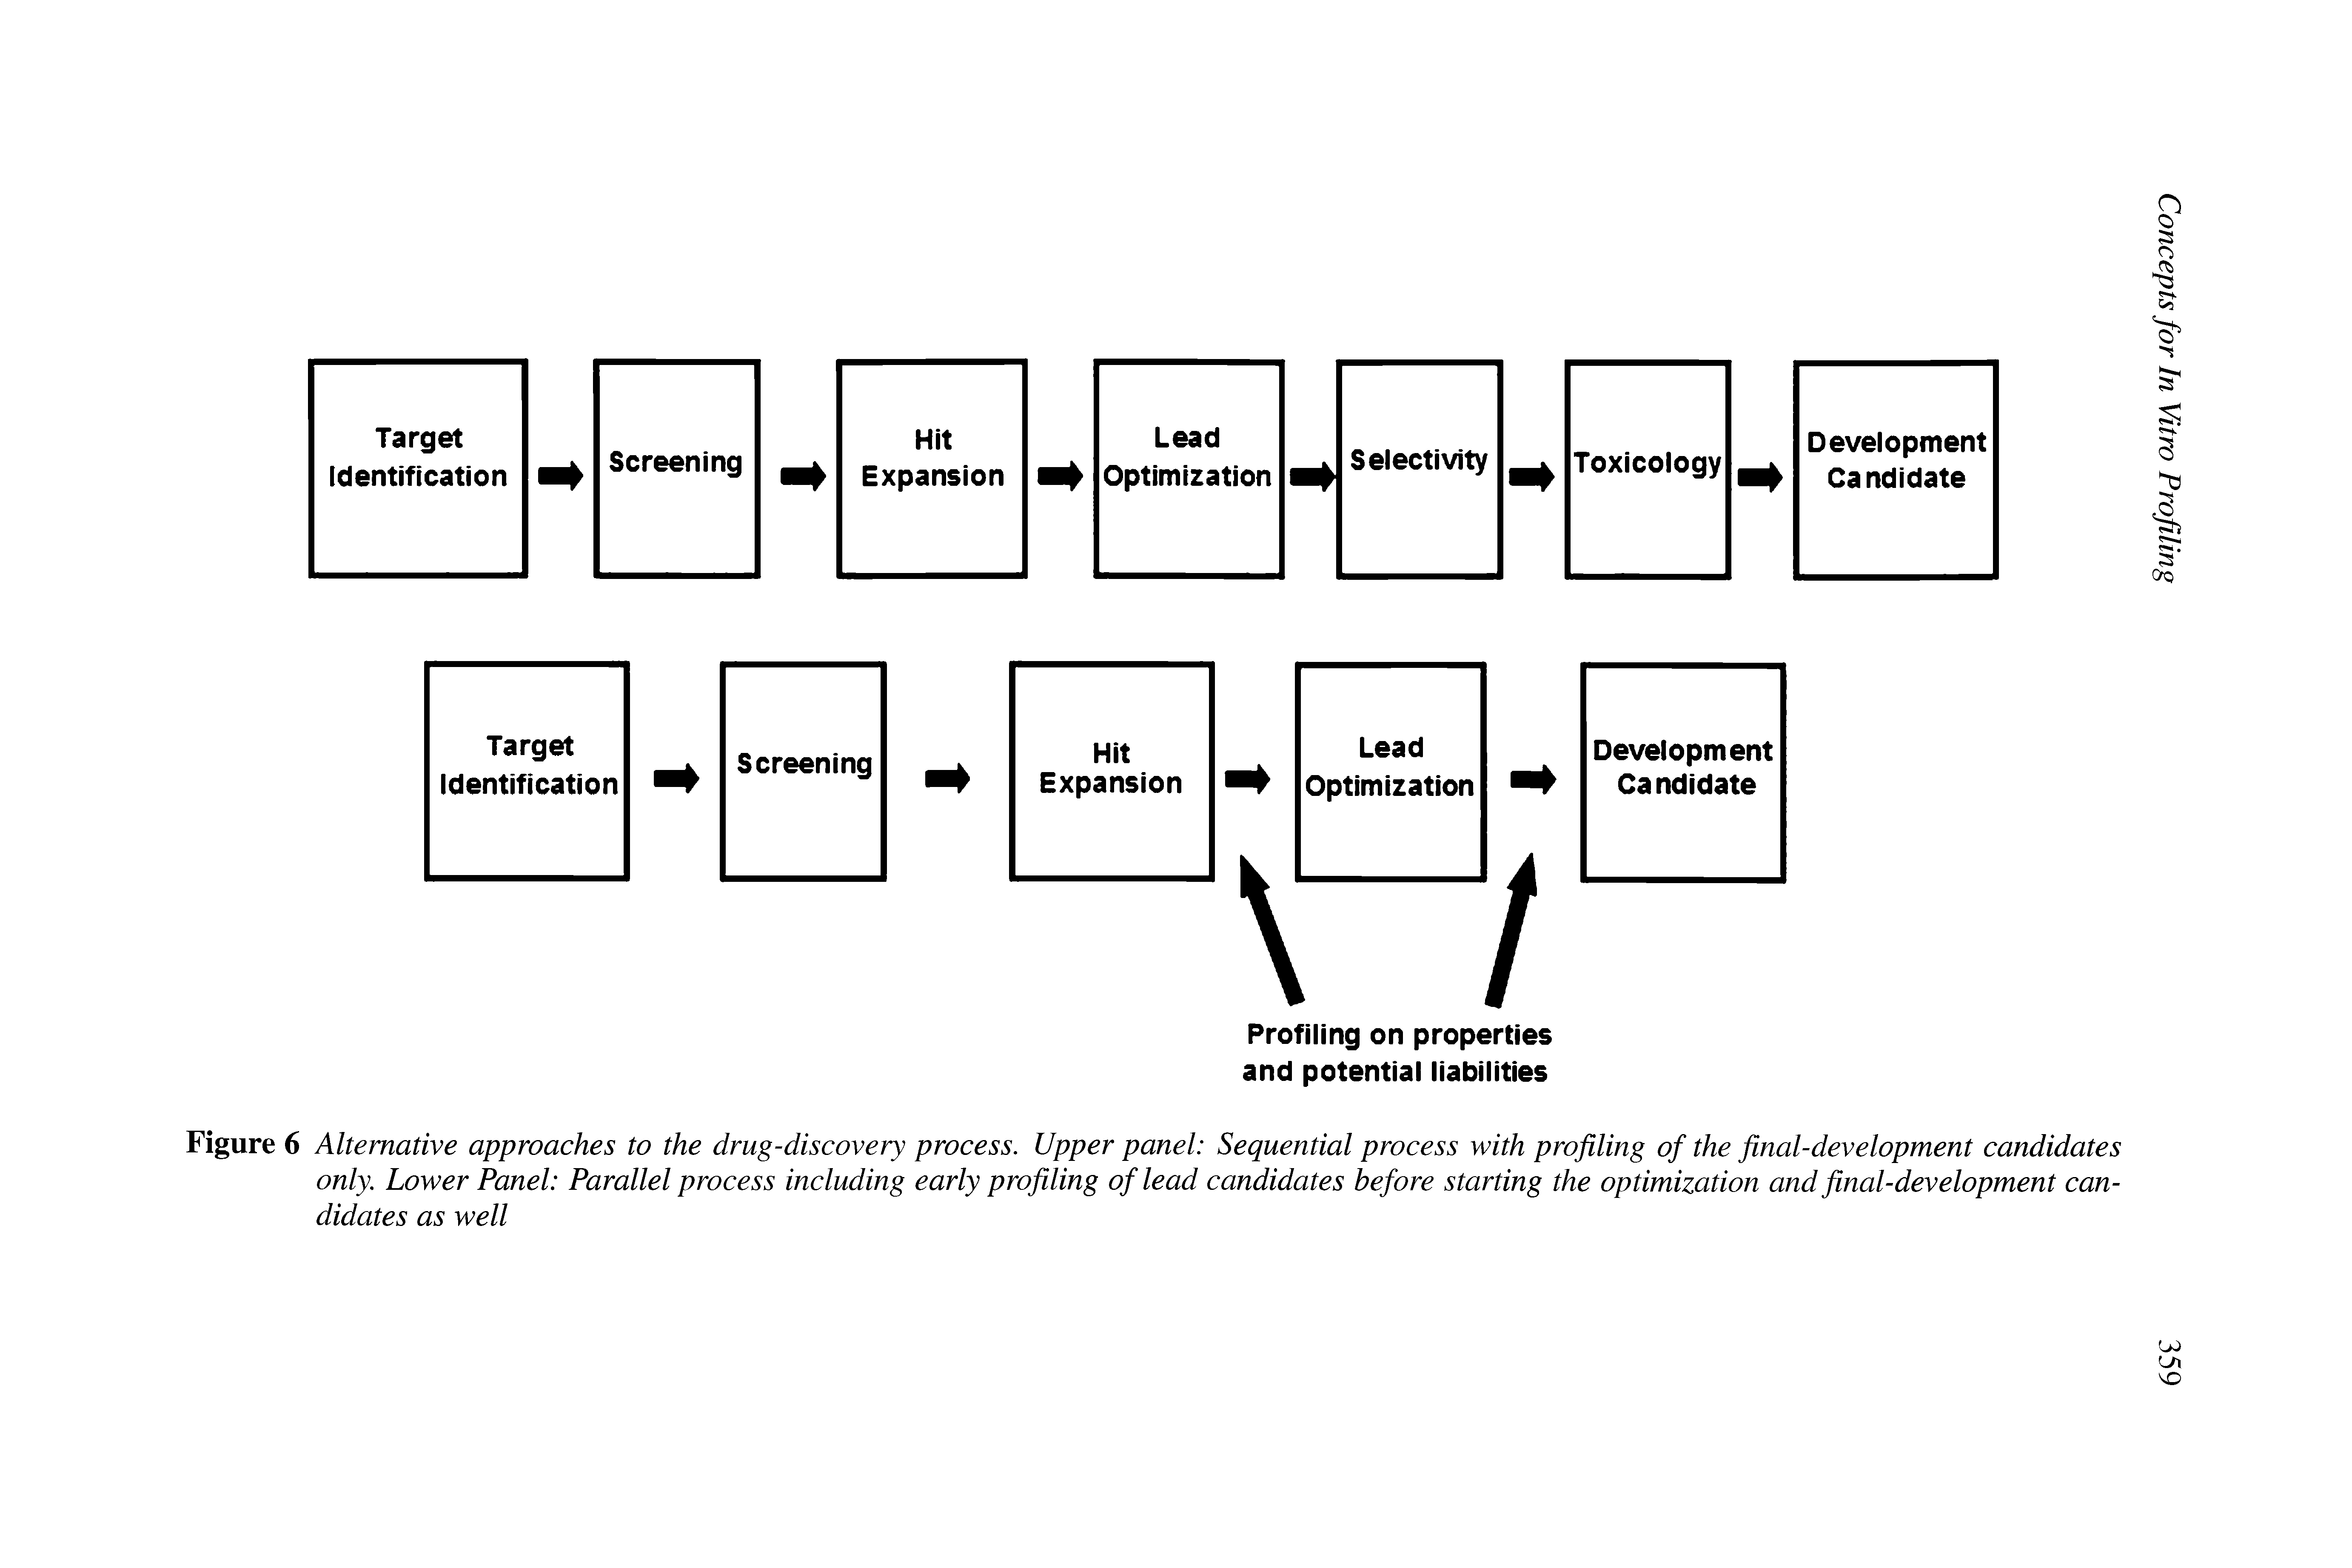 Figure 6 Alternative approaches to the drug-discovery process. Upper panel Sequential process with profiling of the final-development candidates only. Lower Panel Parallel process including early profiling of lead candidates before starting the optimization and final-development candidates as well...